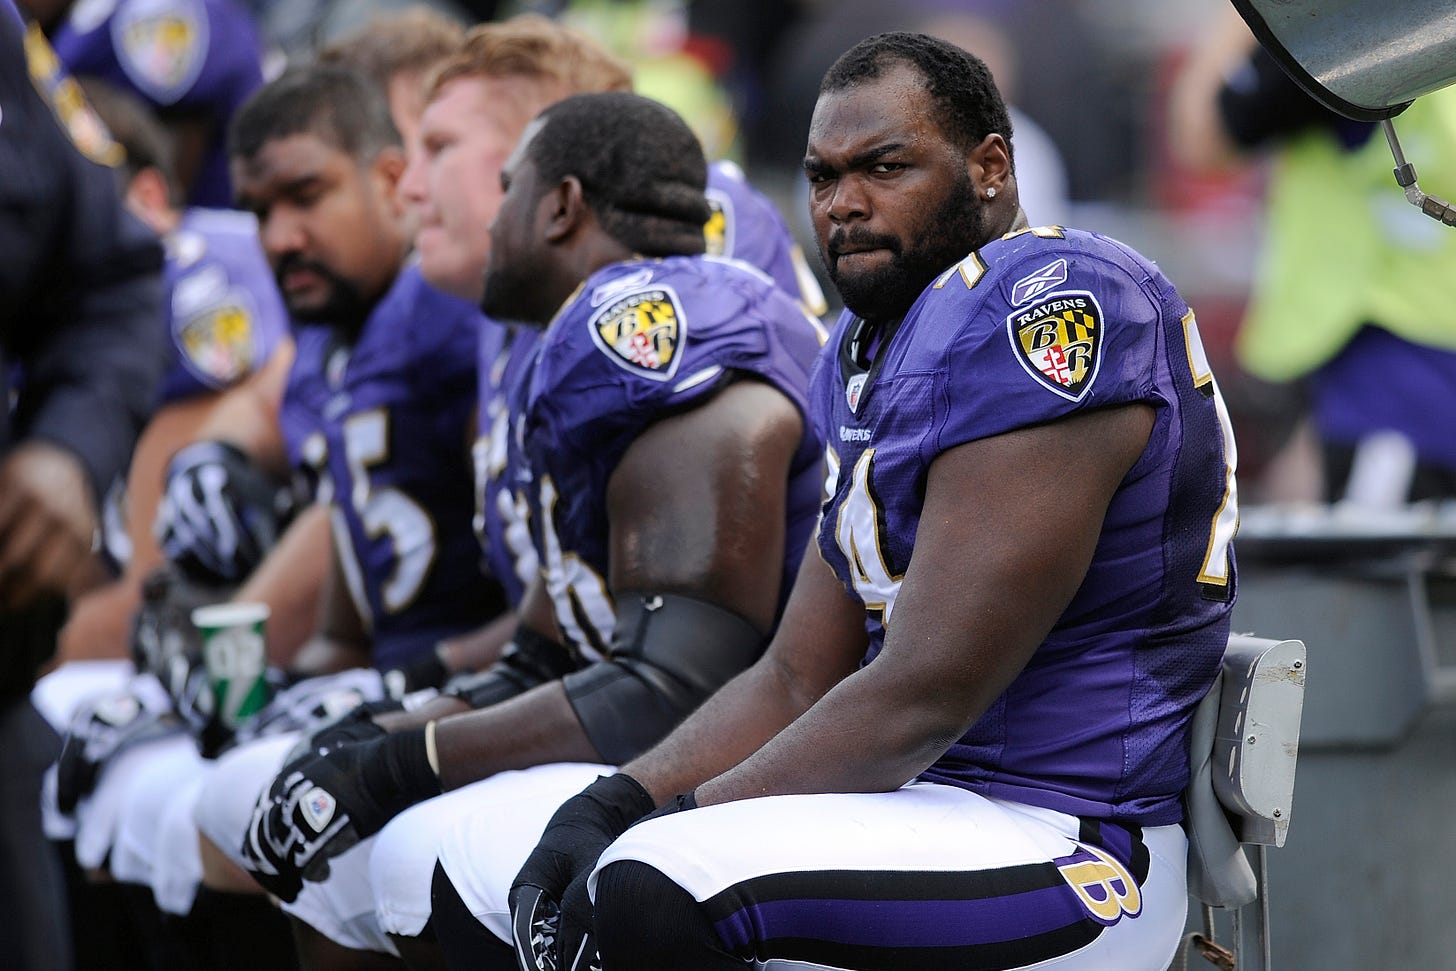 Baltimore Ravens offensive tackle Michael Oher sits on the beach during the first half of an NFL football game against the Buffalo Bills in Baltimore, Sunday, Oct. 24, 2010.